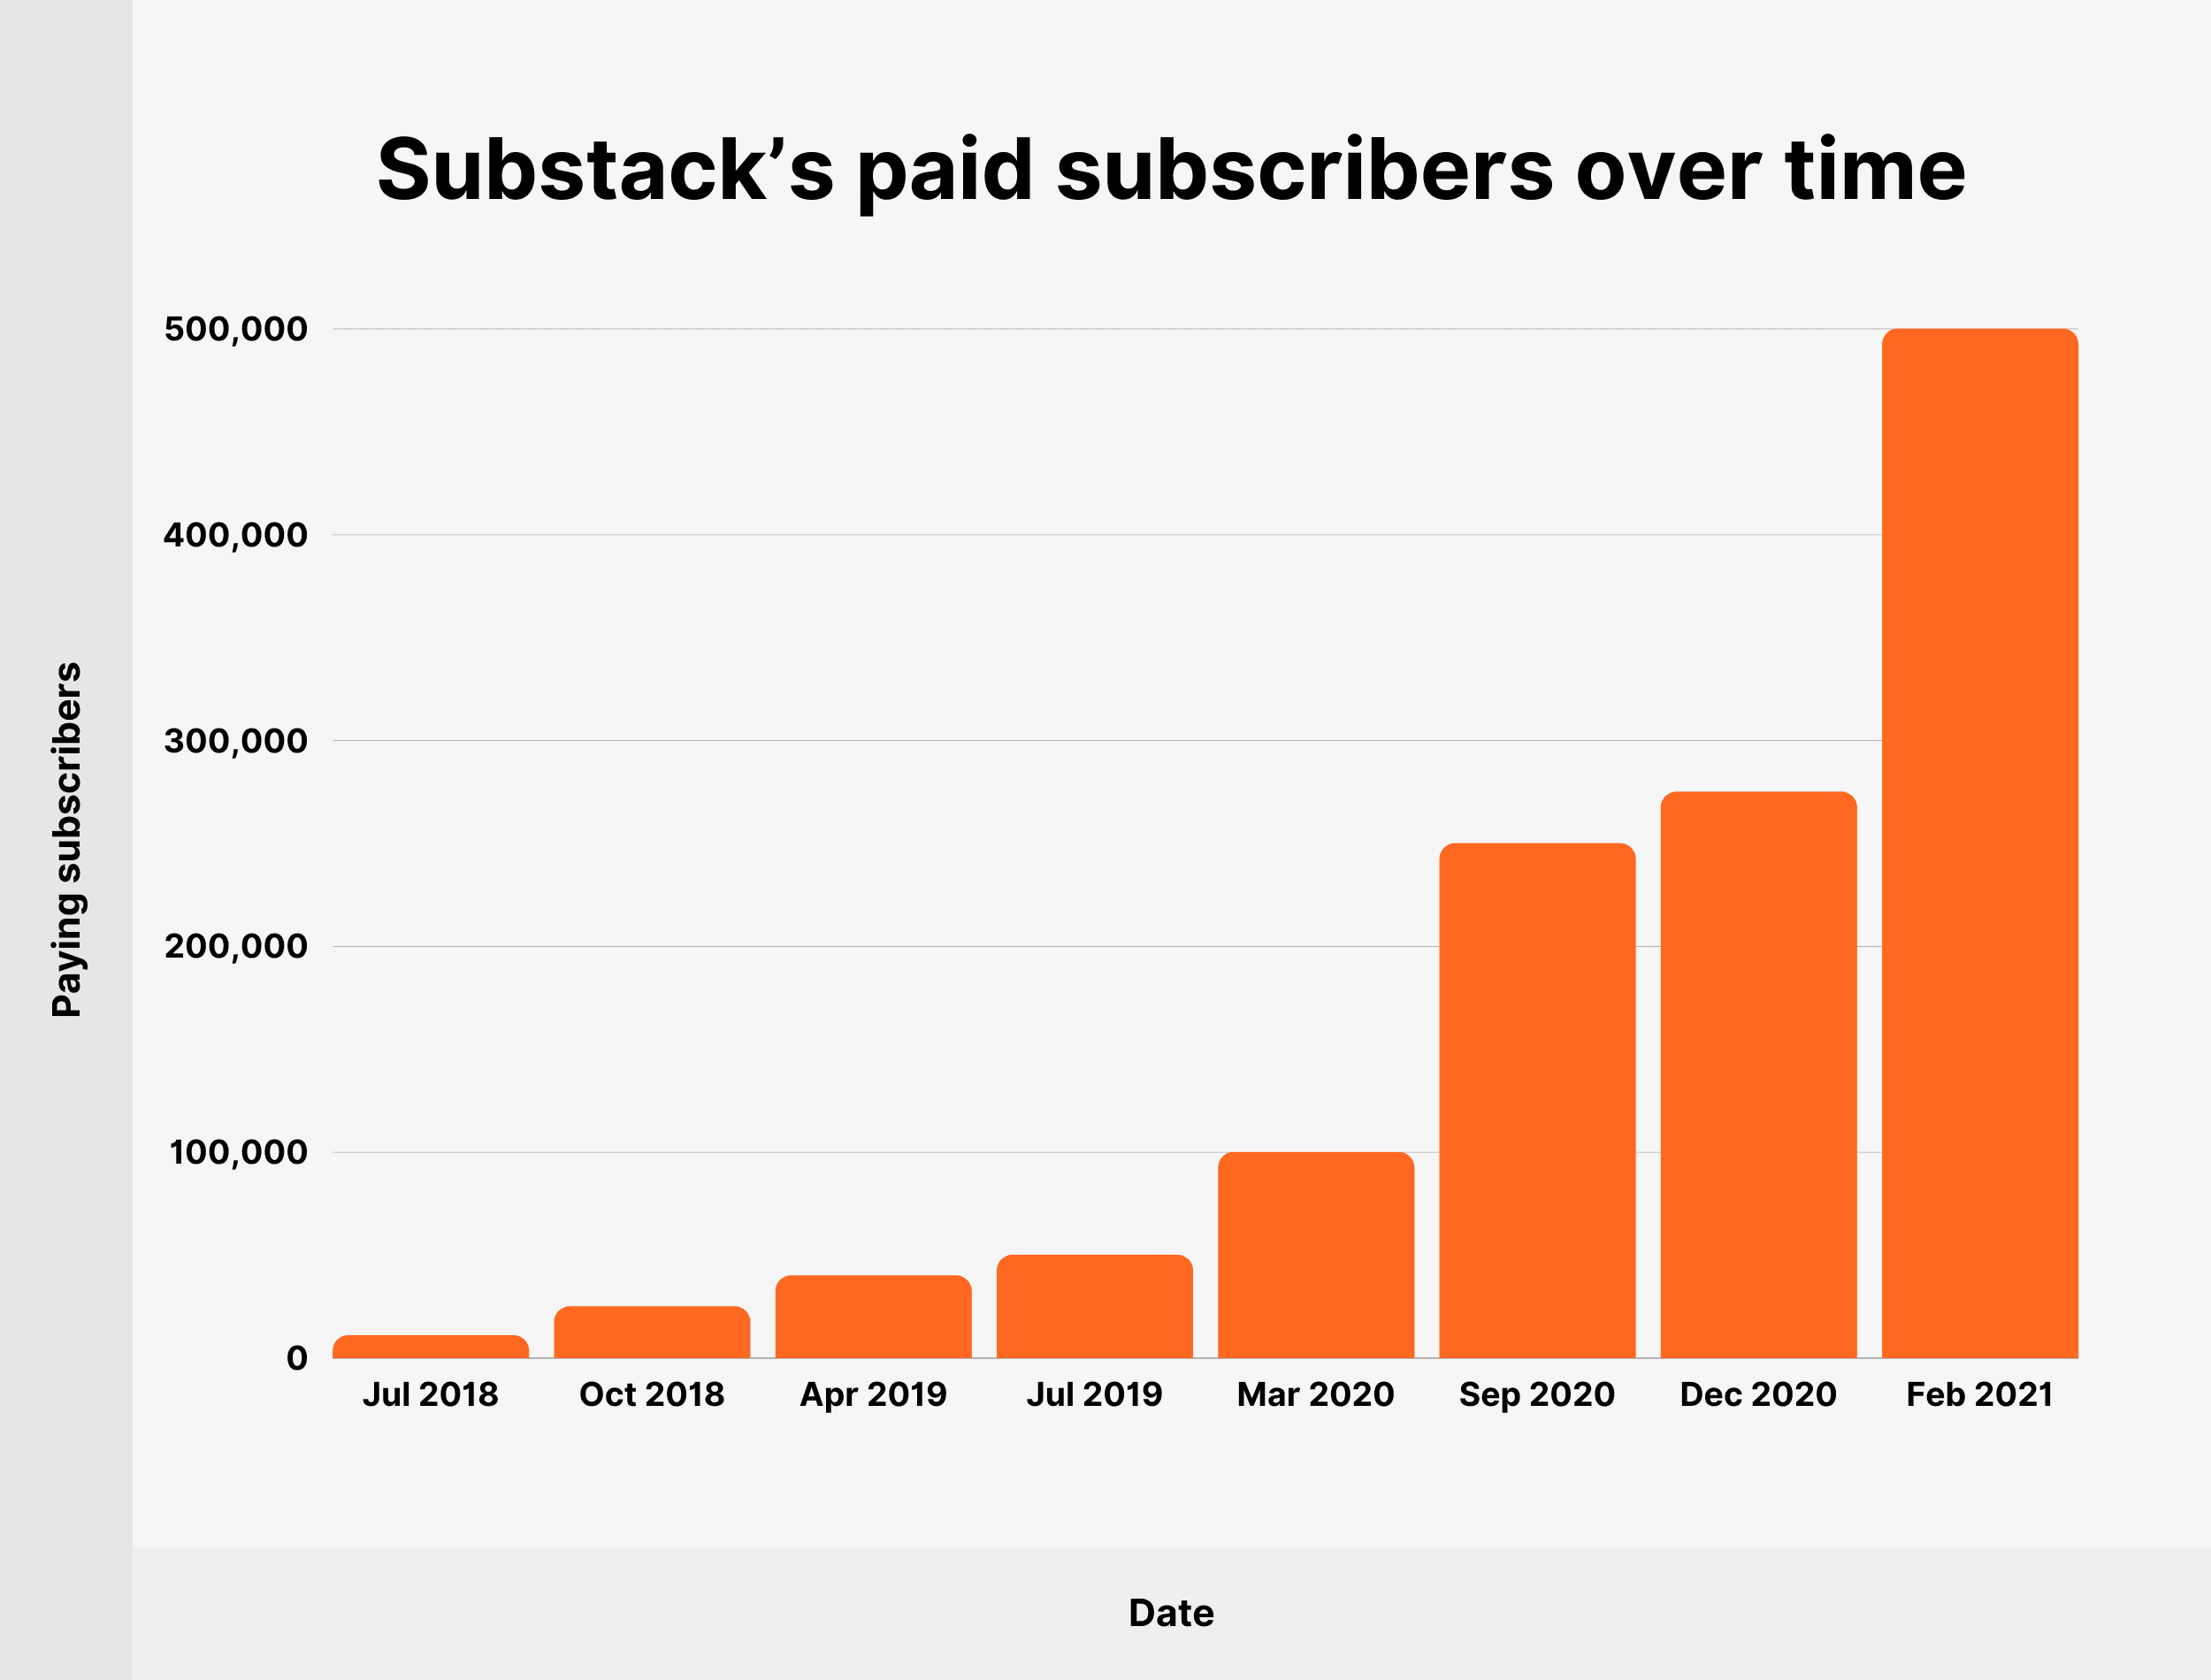 Substack’s paid subscribers over time